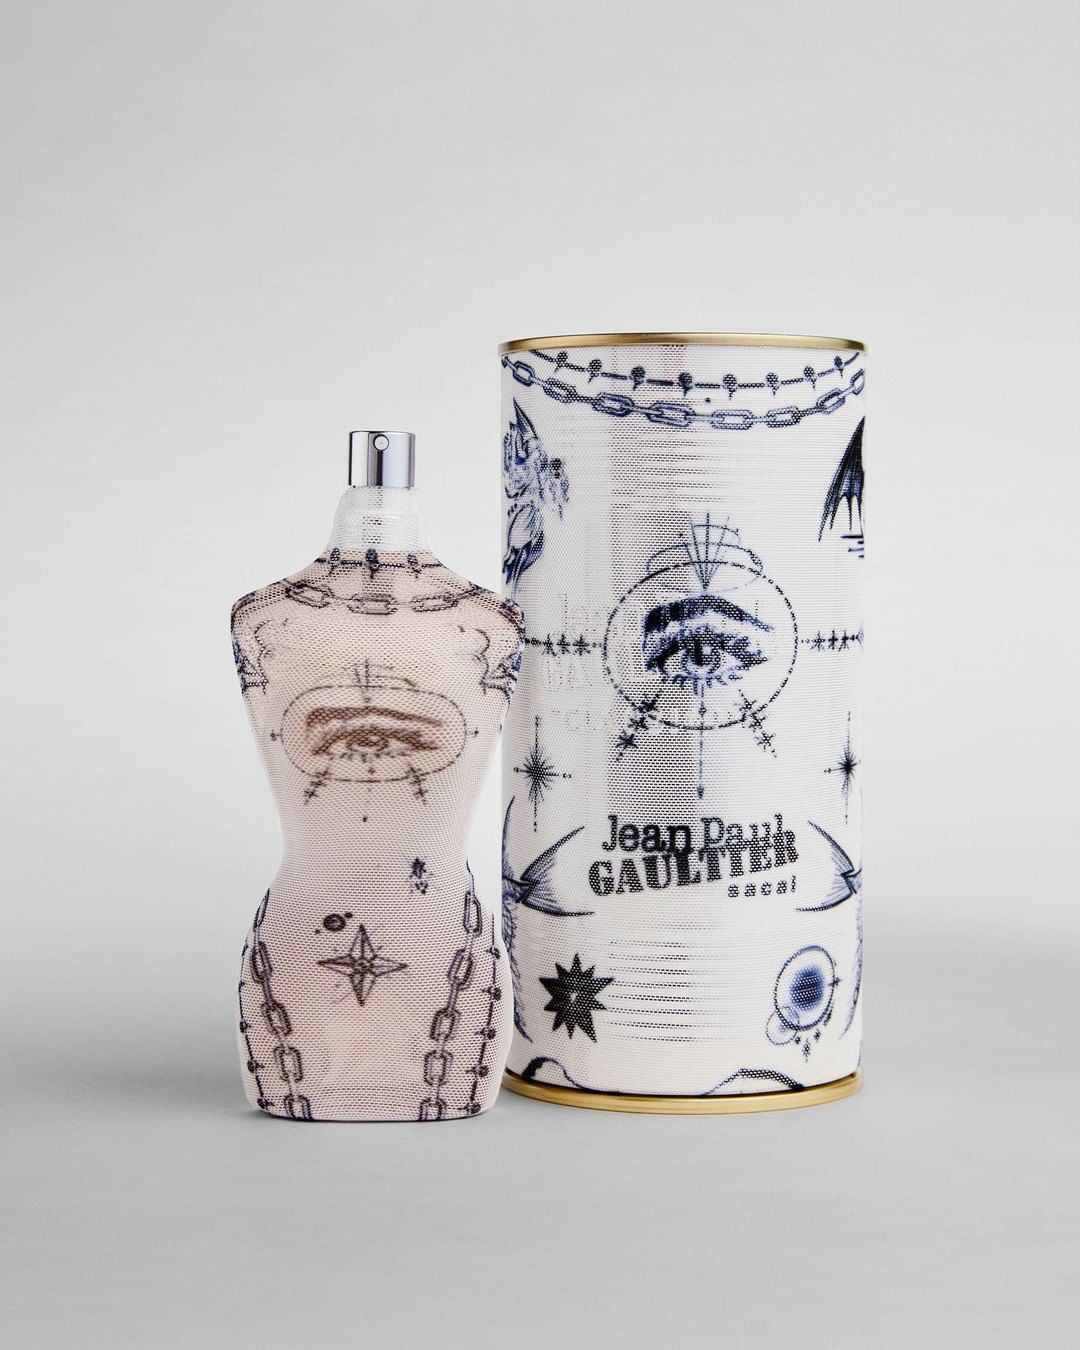 SACAI x Jean Paul Gaultier special RTW collection 2021 (limited edition of Maison's original fragrance)